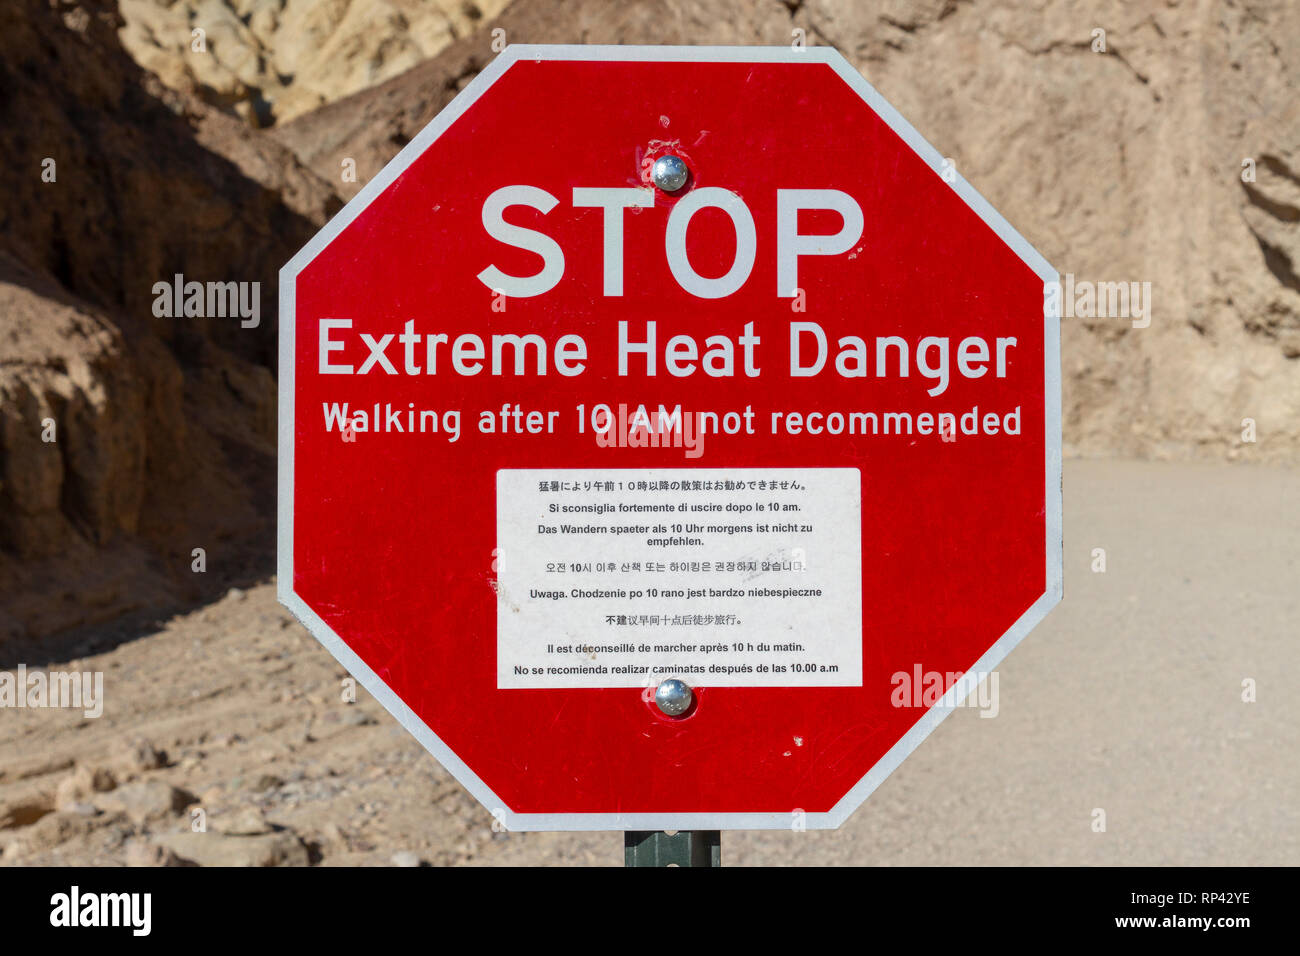 'Stop Extreme Heat Danger' warning sign, Death Valley National Park, California, United States. Stock Photo